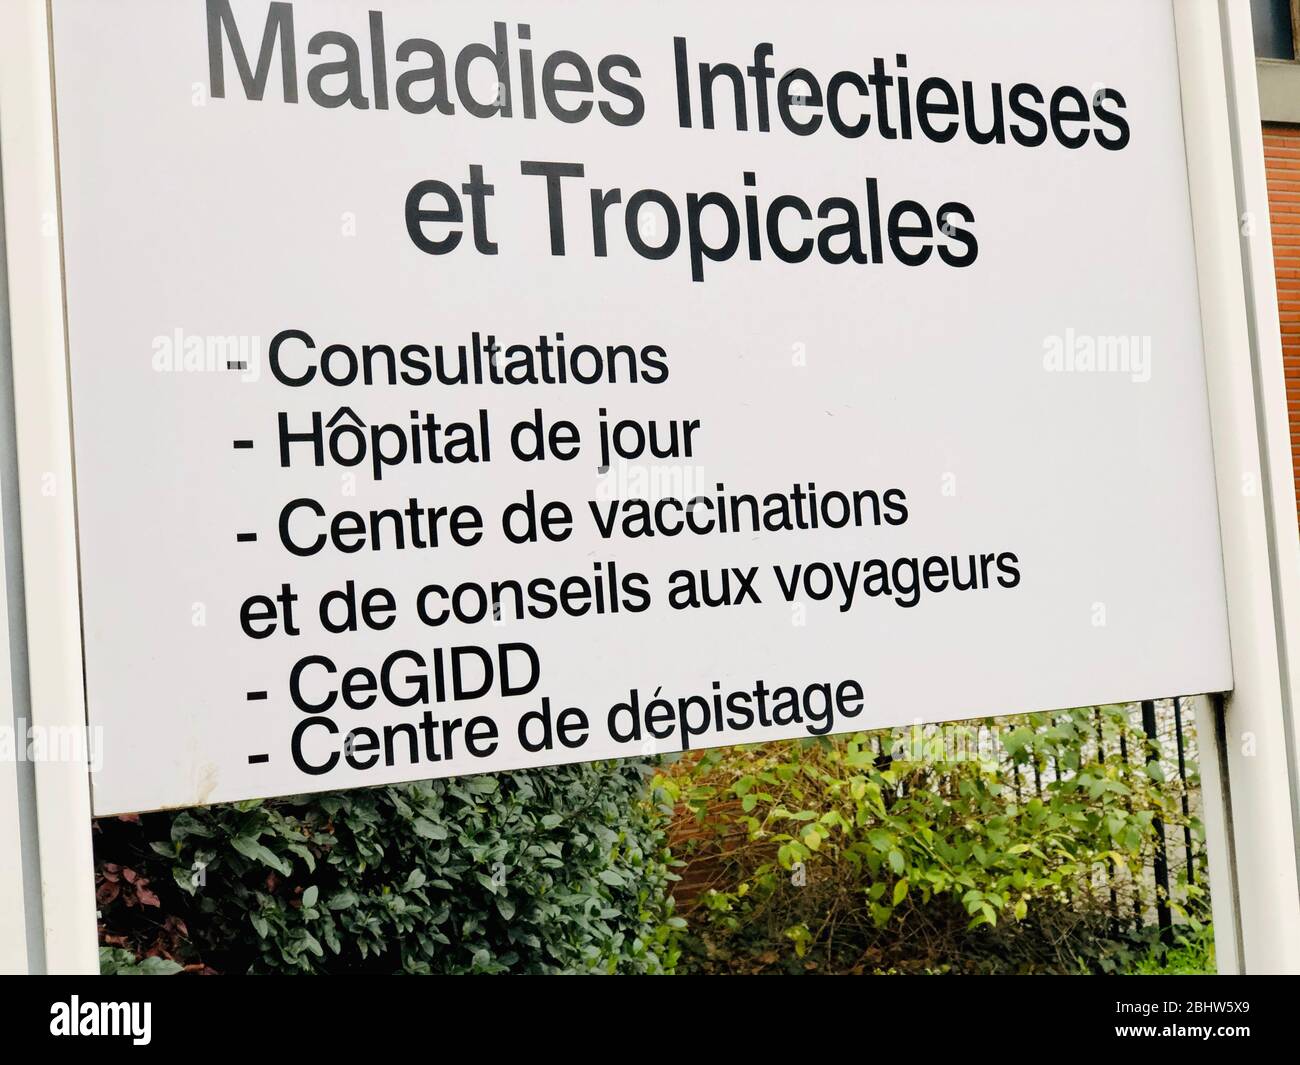 Infectious and tropical diseases Stock Photo